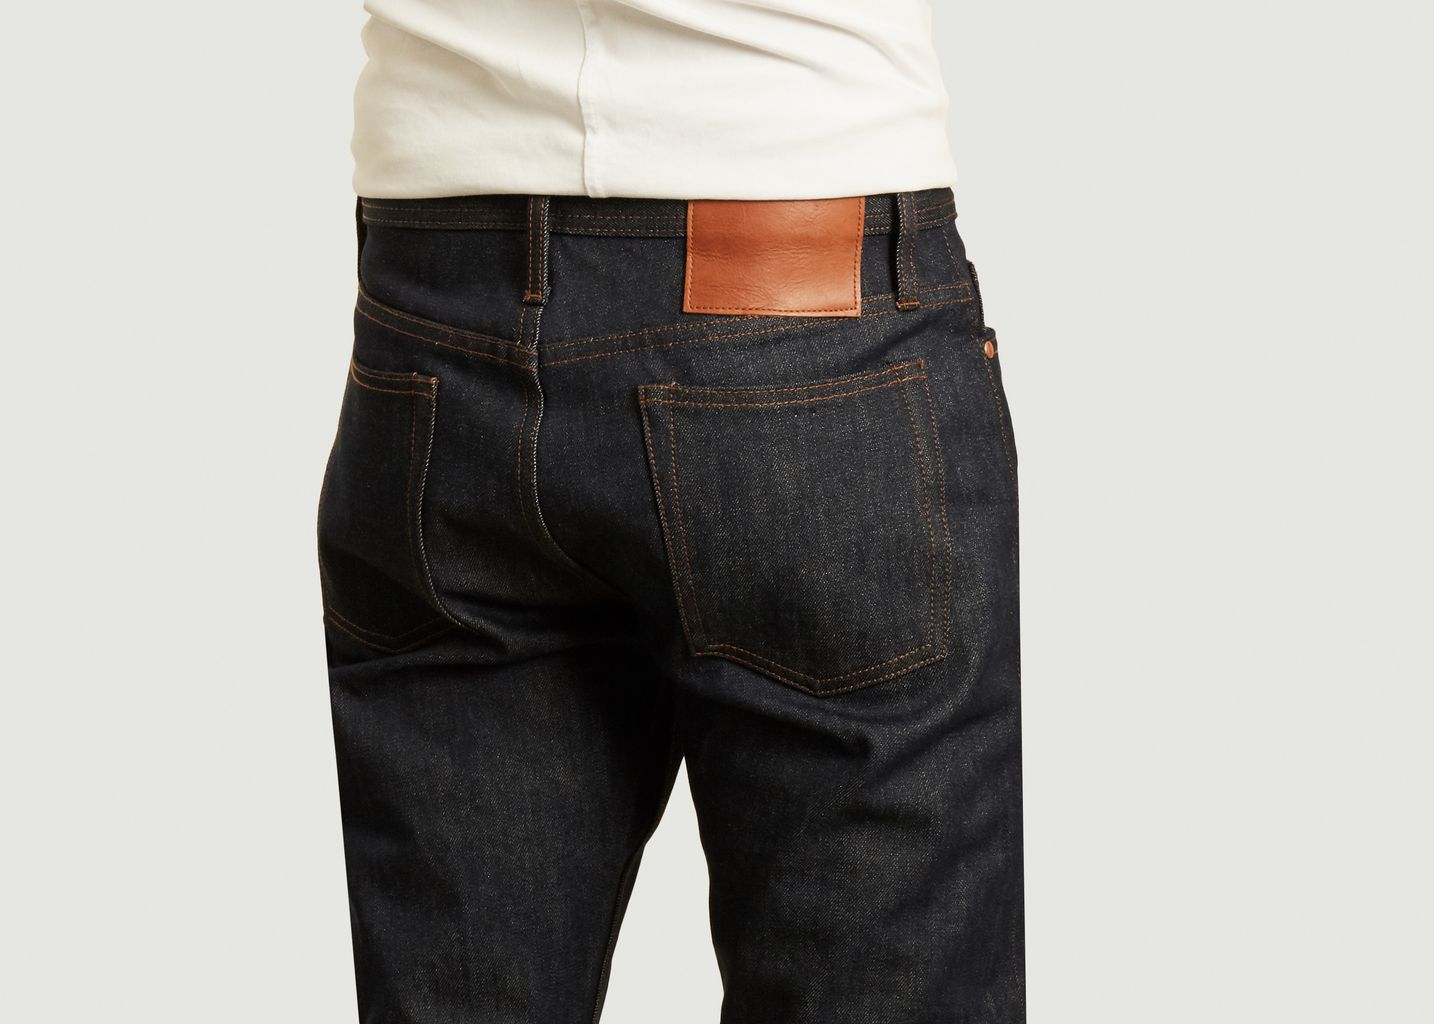 UB201 tapered 14.5oz selvedge jeans - The Unbranded Brand